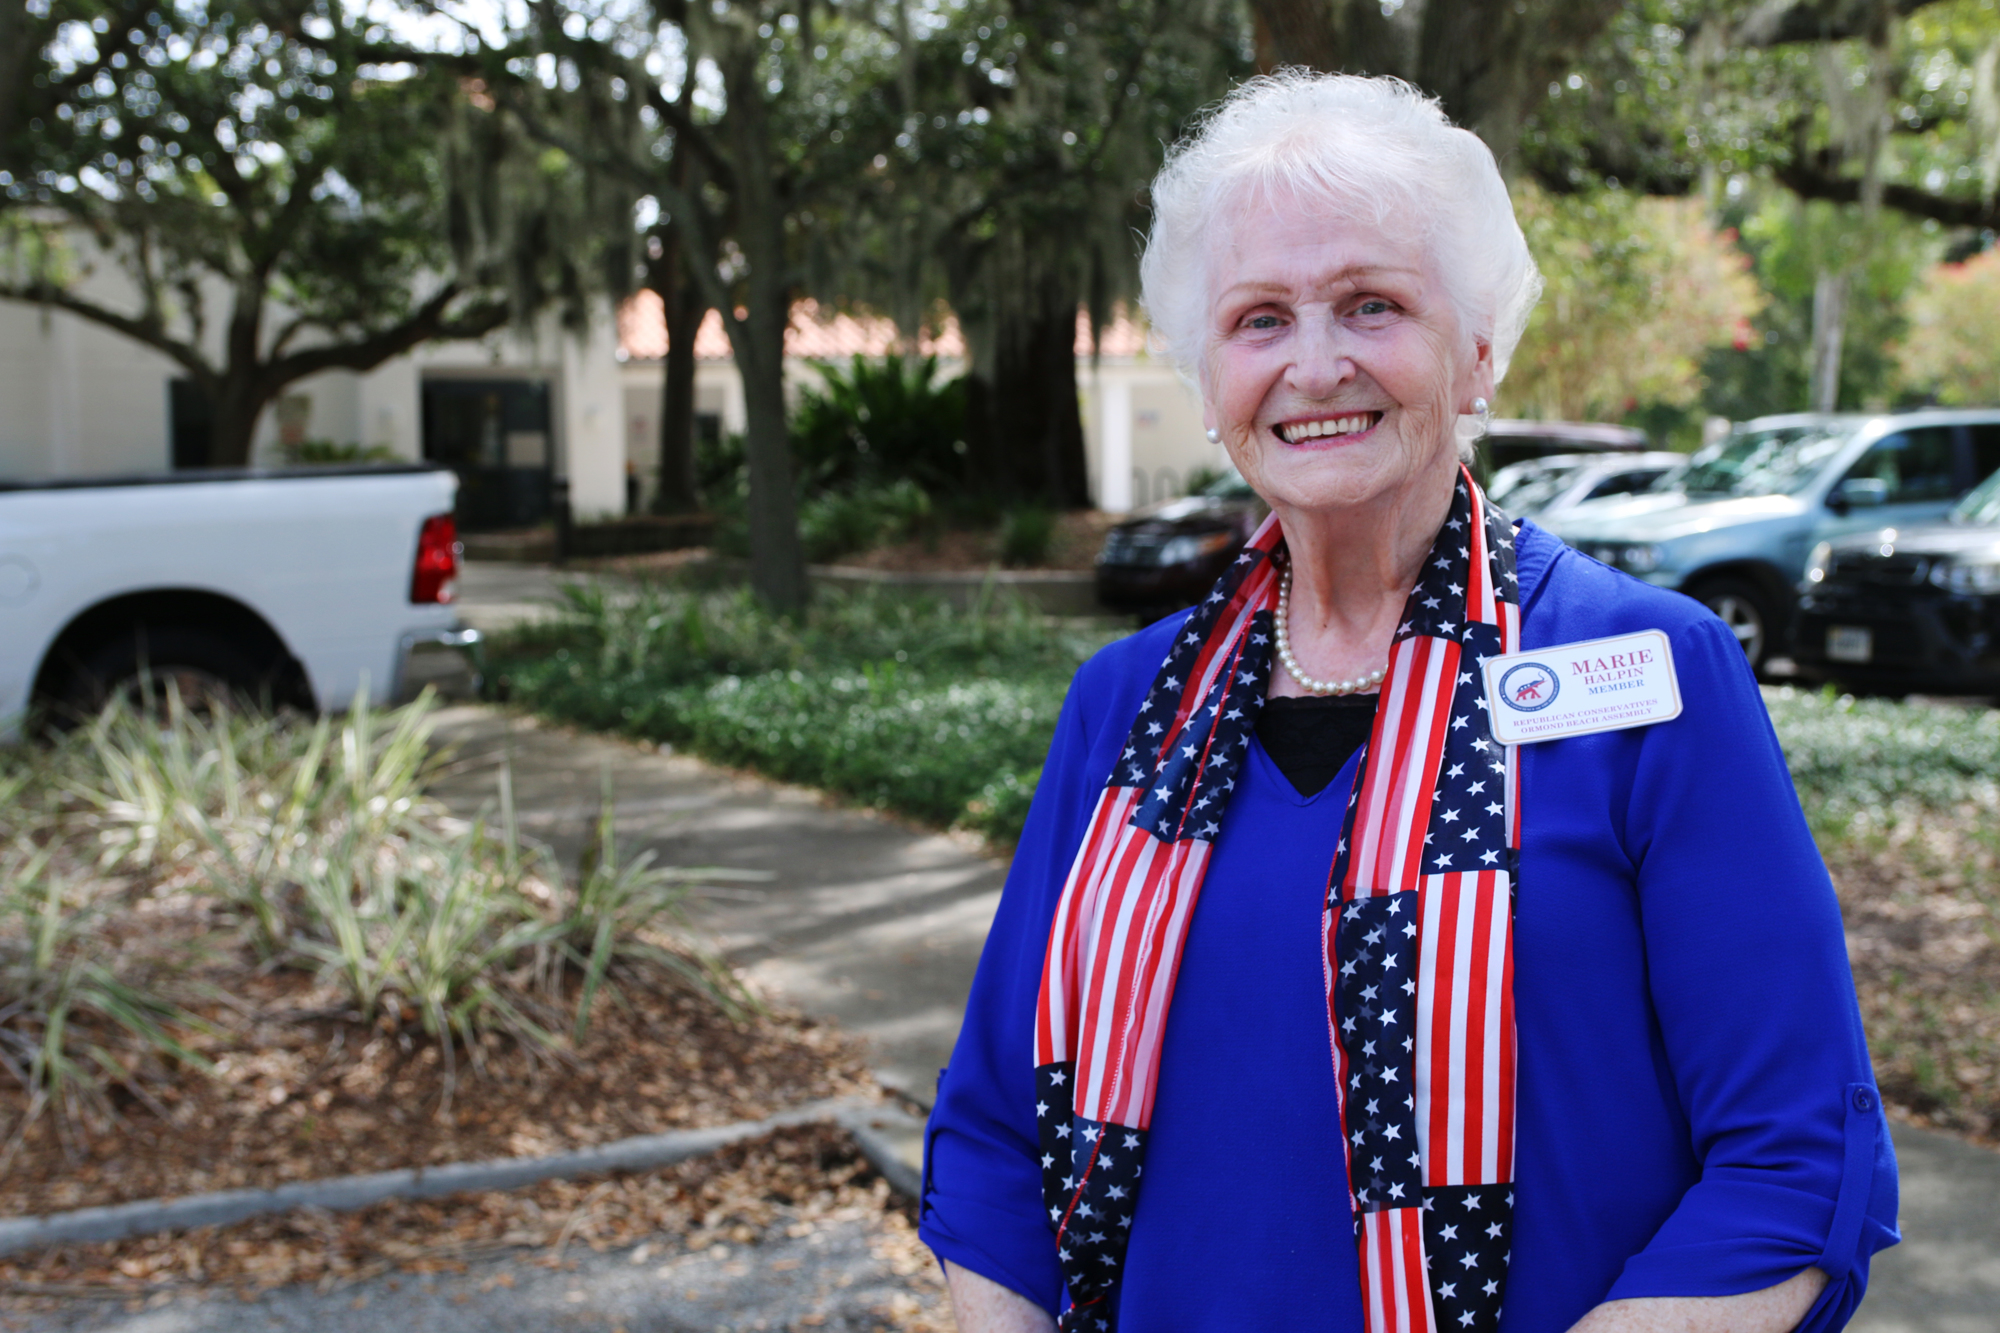 Ormond Beach resident Marie Halpin has been volunteering at the polls for over six decades. Photo by Jarleene Almenas